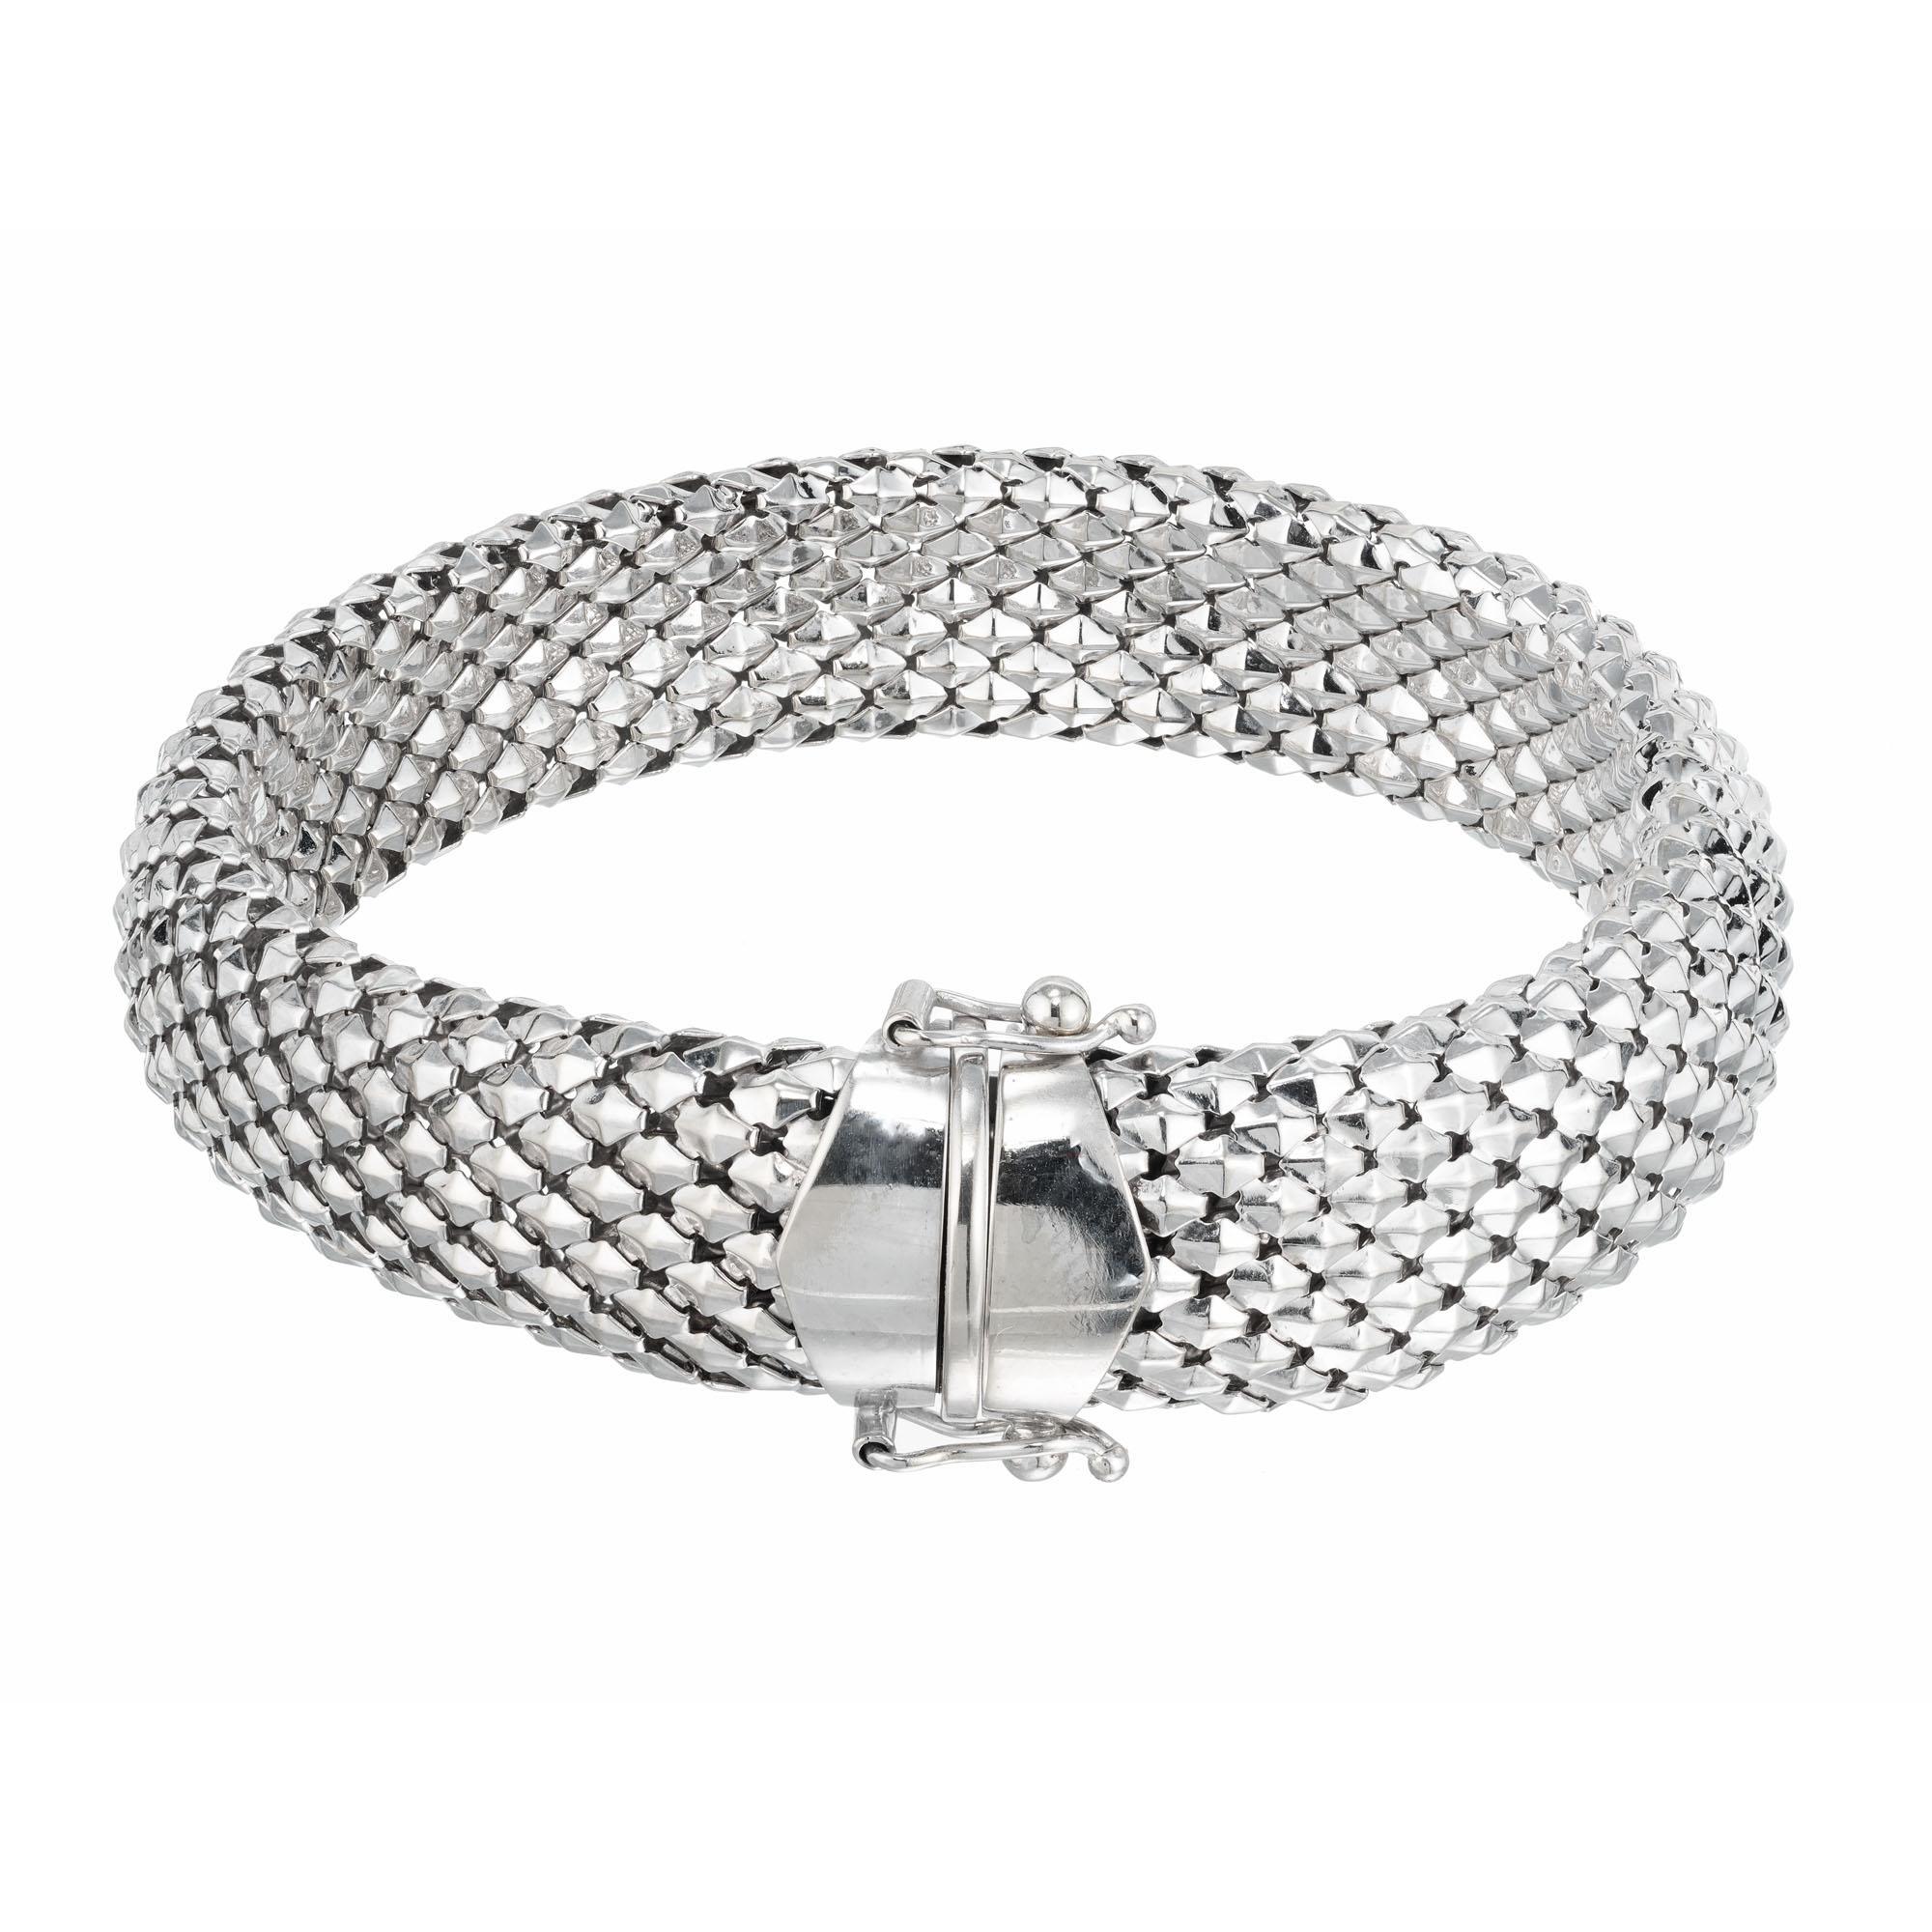 14 Karat White Gold Domed Weave Bracelet In Excellent Condition For Sale In Stamford, CT